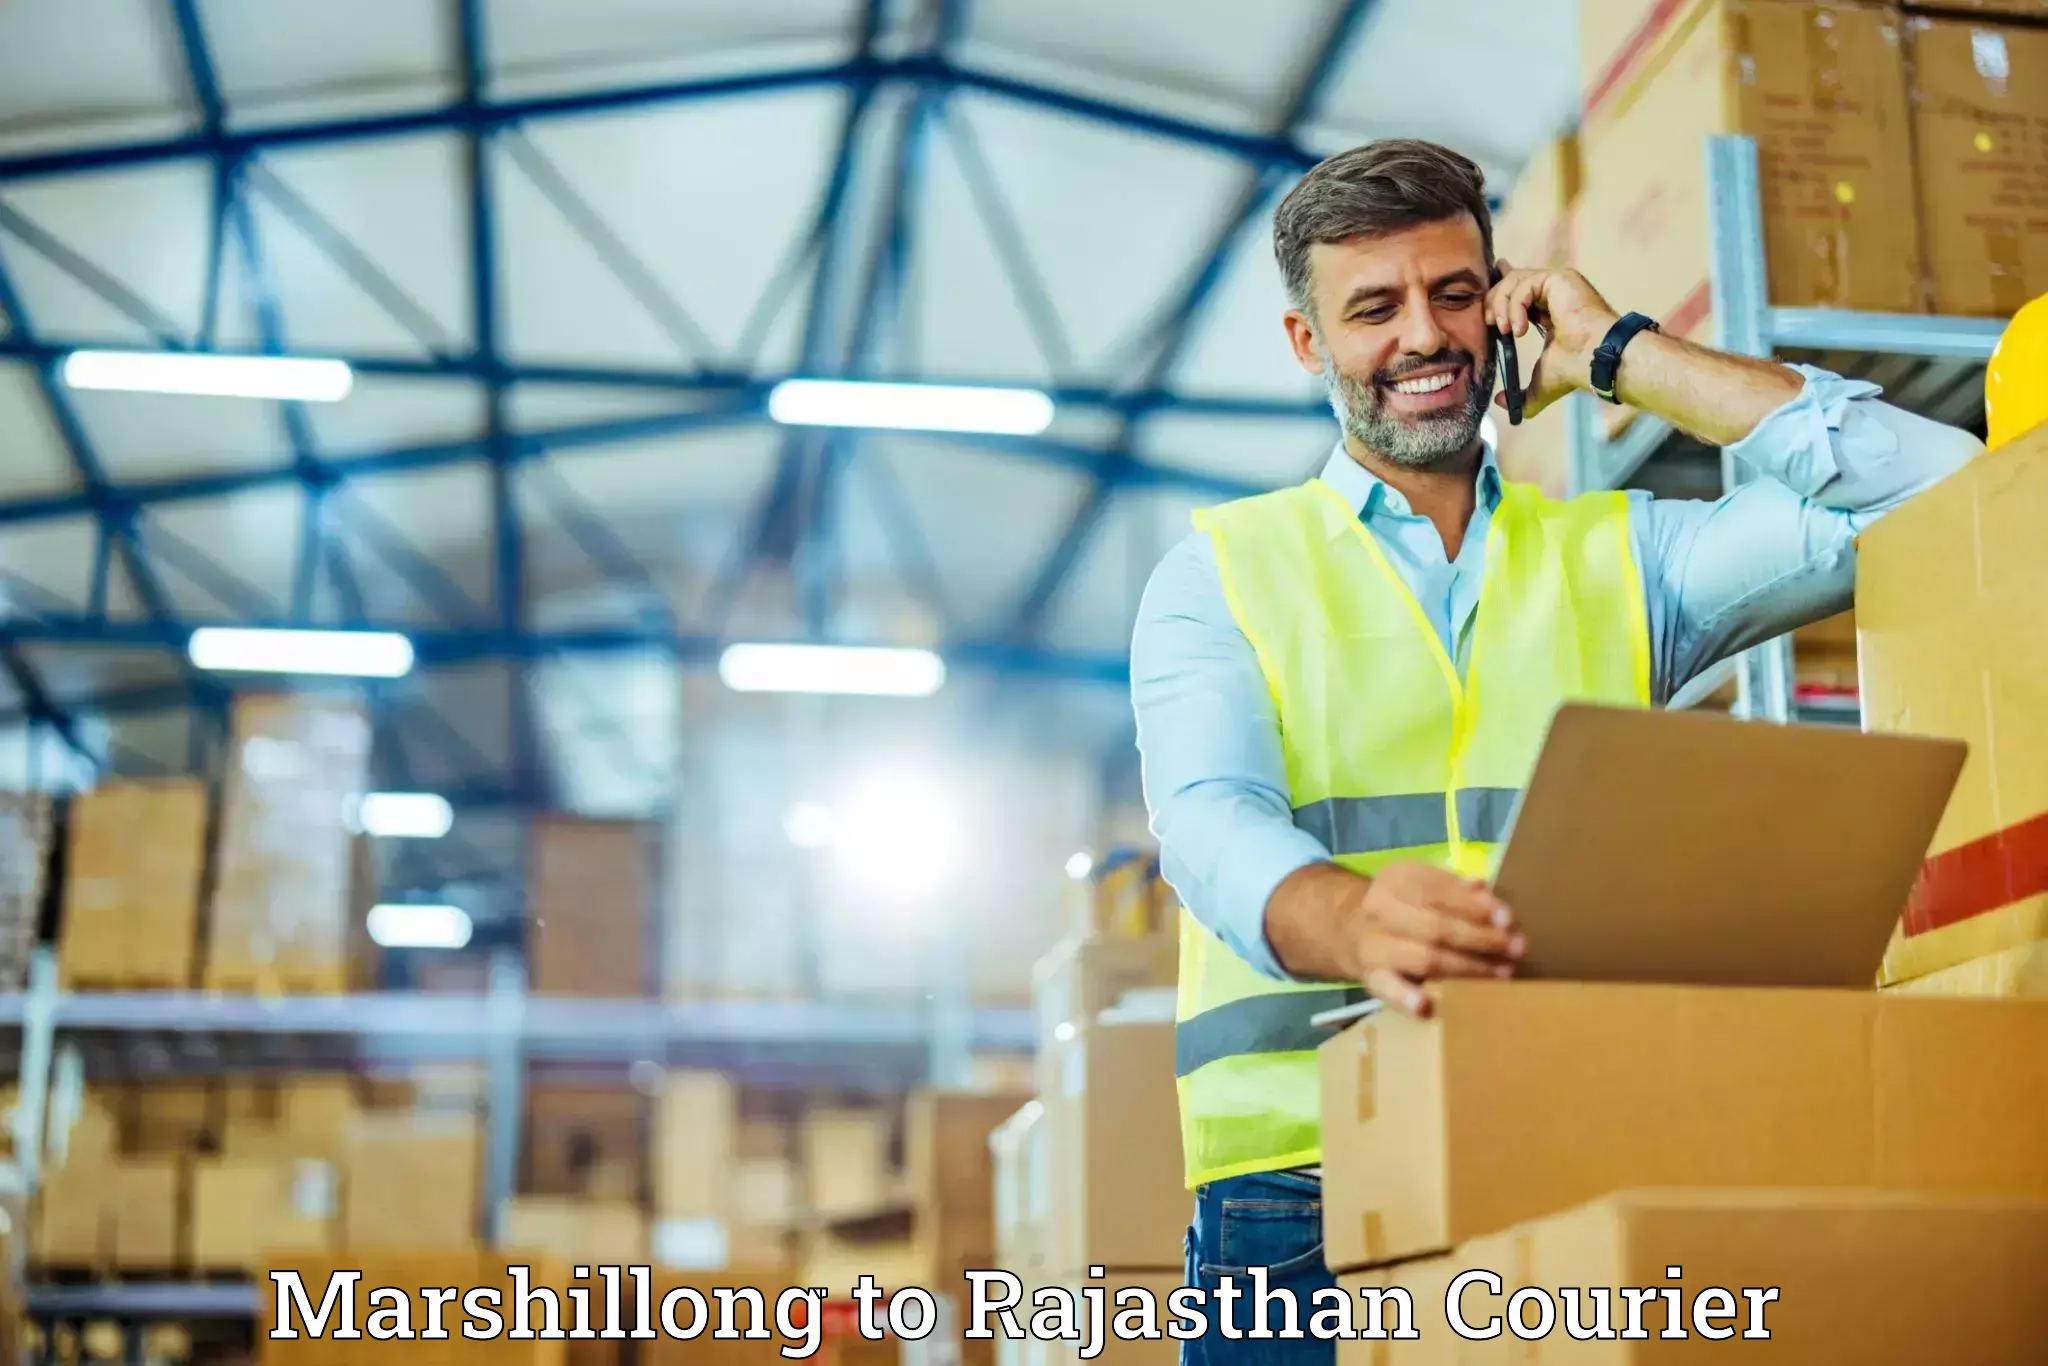 Furniture moving specialists Marshillong to Dholpur